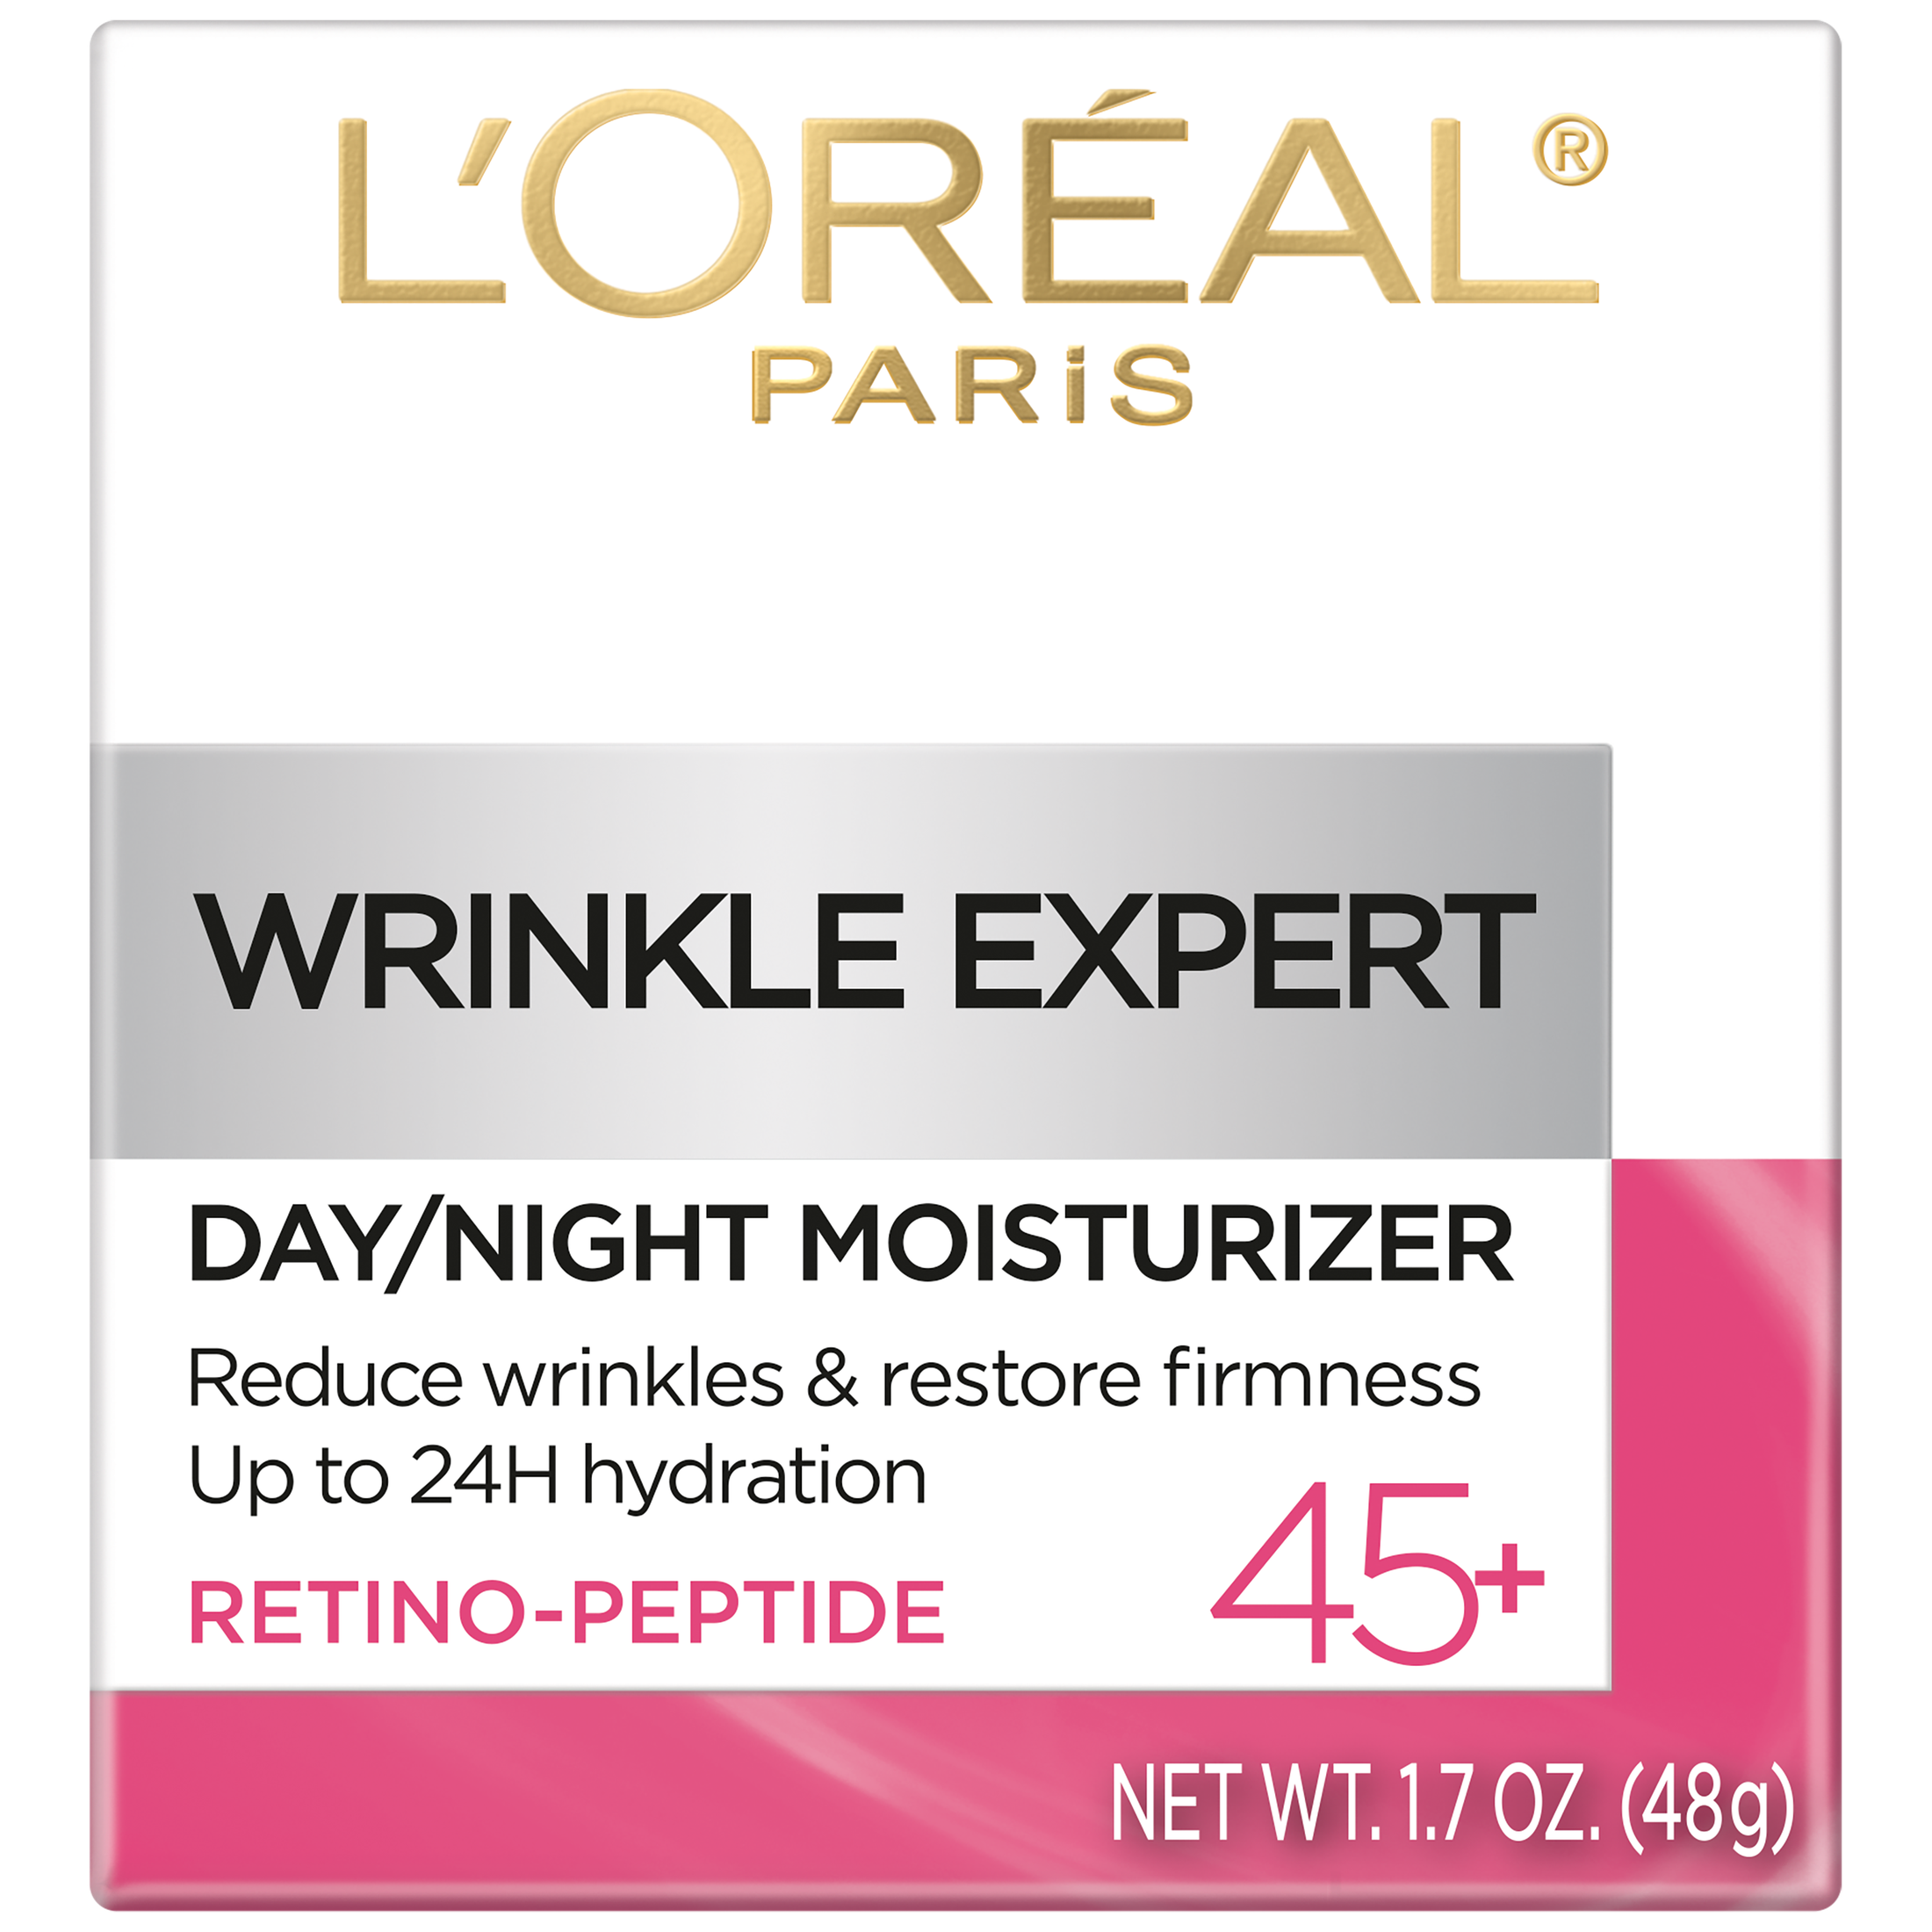 L'Oreal Paris Wrinkle Expert 45+ Day and Night Moisturizer, 1.7 oz - image 3 of 5